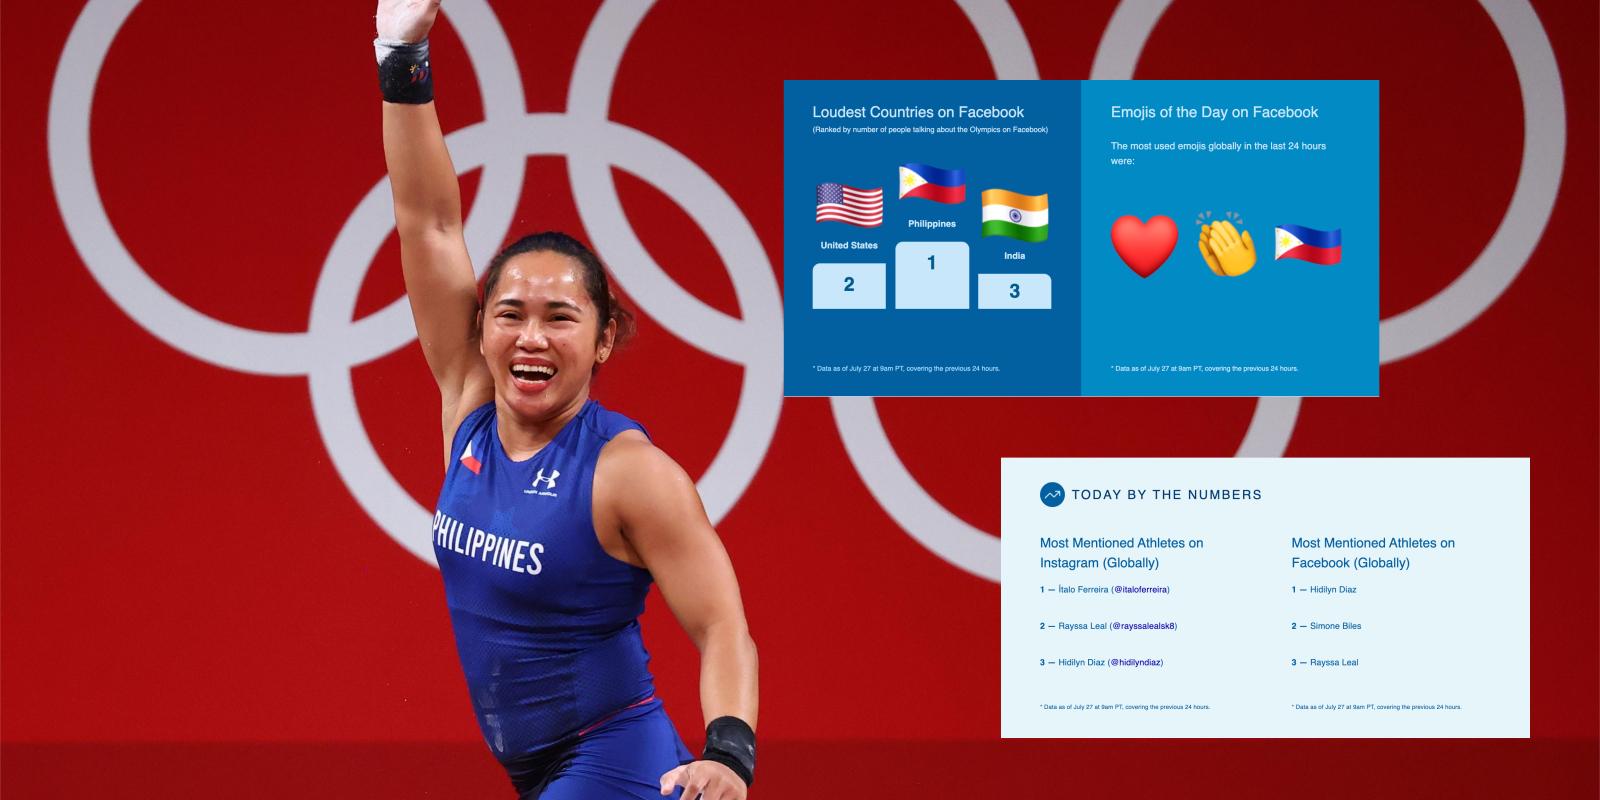 Hidilyn Diaz gave the Philippines its first-ever Olympic gold medal this week, and Filipinos celebrated it loud and proud on social media. (Photo / Retrieved from GMA News)